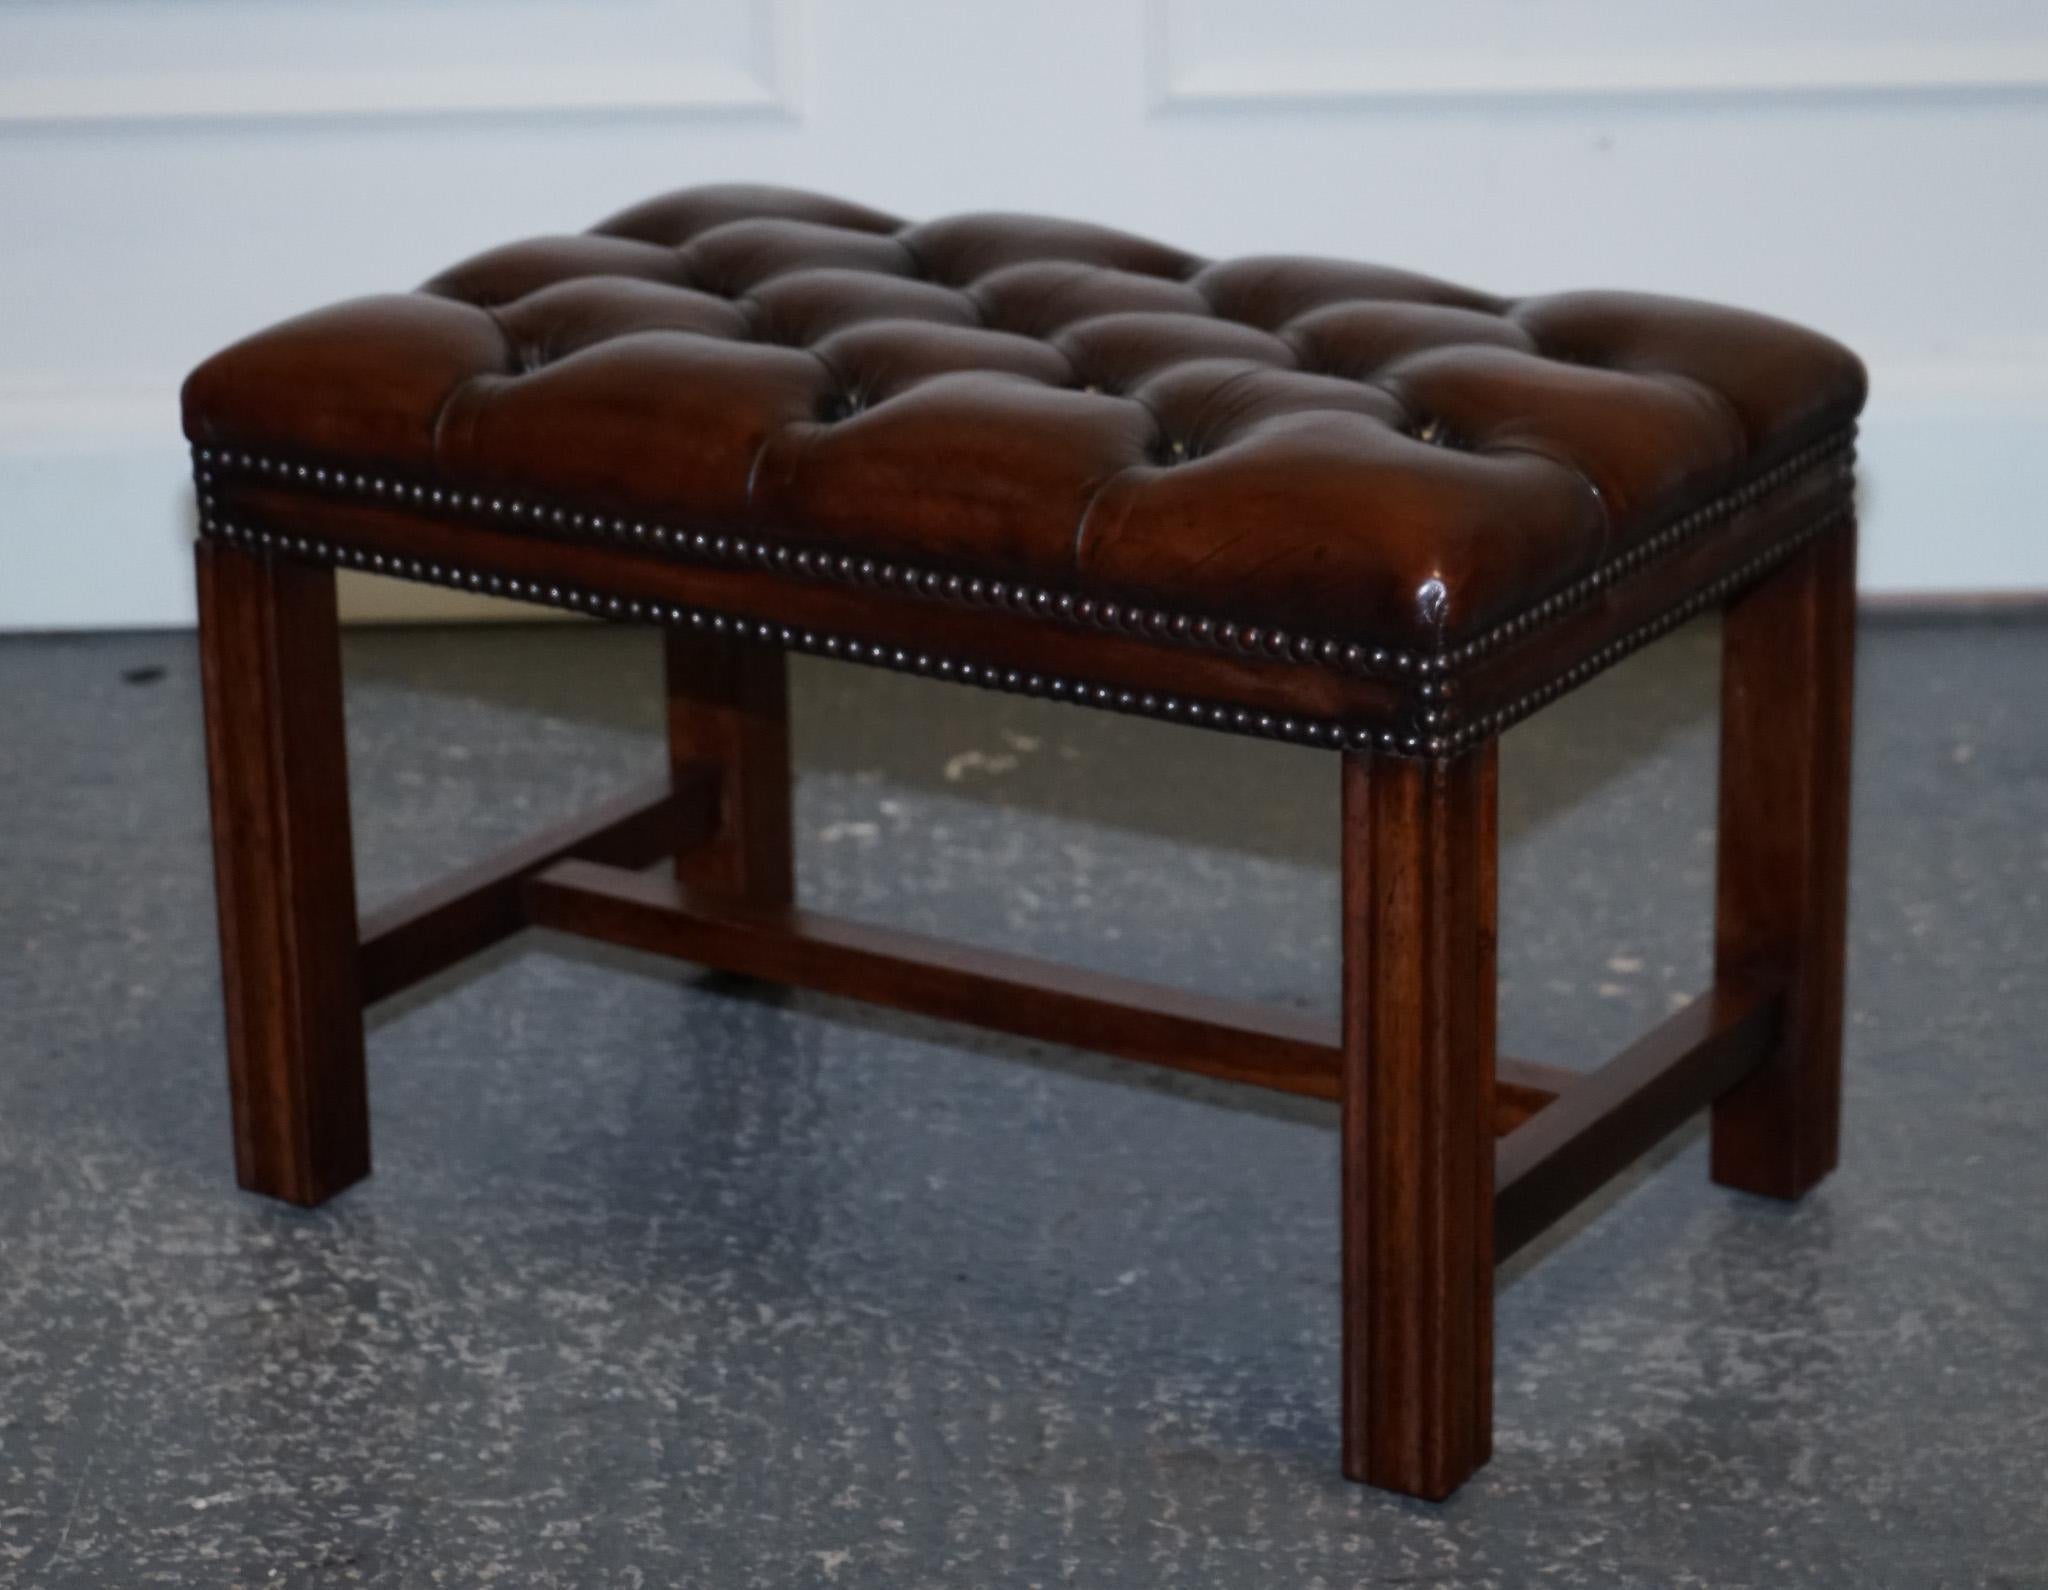 Leather VINTAGE RESTORED CHESTERFiELD HAND DYED BROWN LEATHER TUFFED FOOTSTOOL (2/2) For Sale